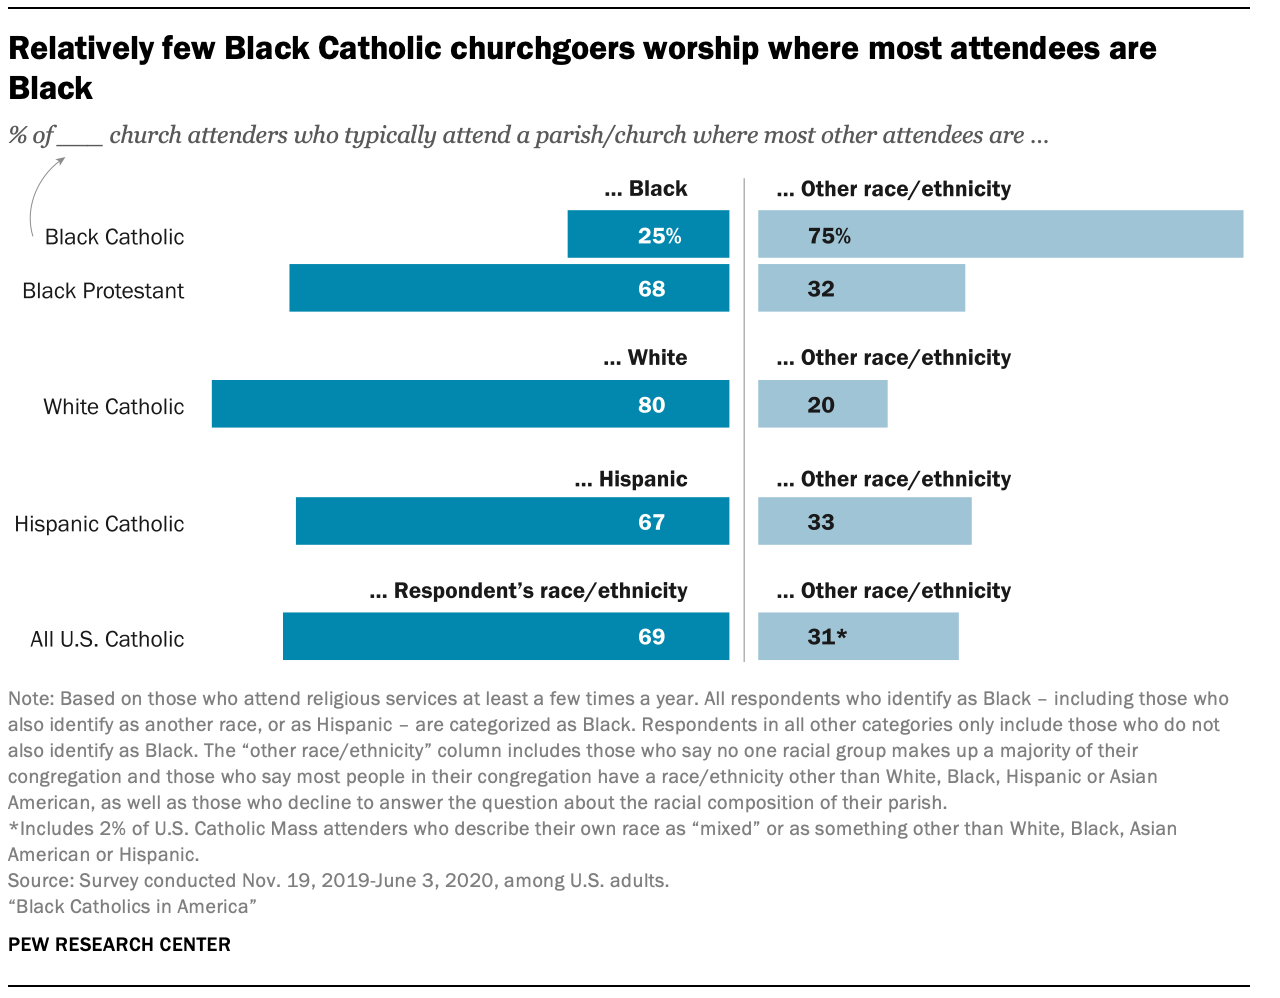 A chart showing relatively few Black Catholic churchgoers worship where most attendees are Black